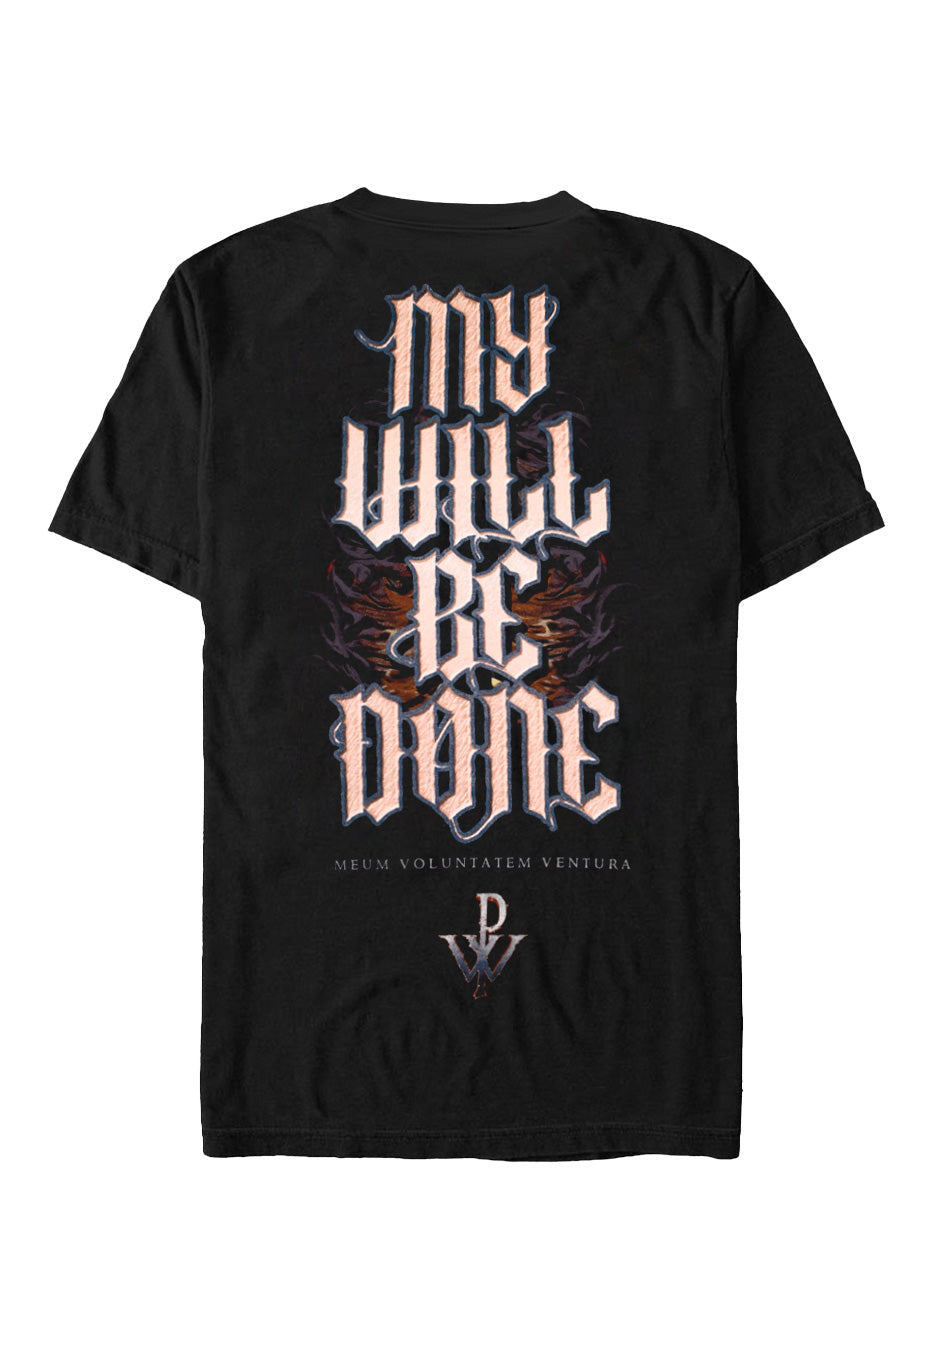 Powerwolf - My Will Be Done - T-Shirt